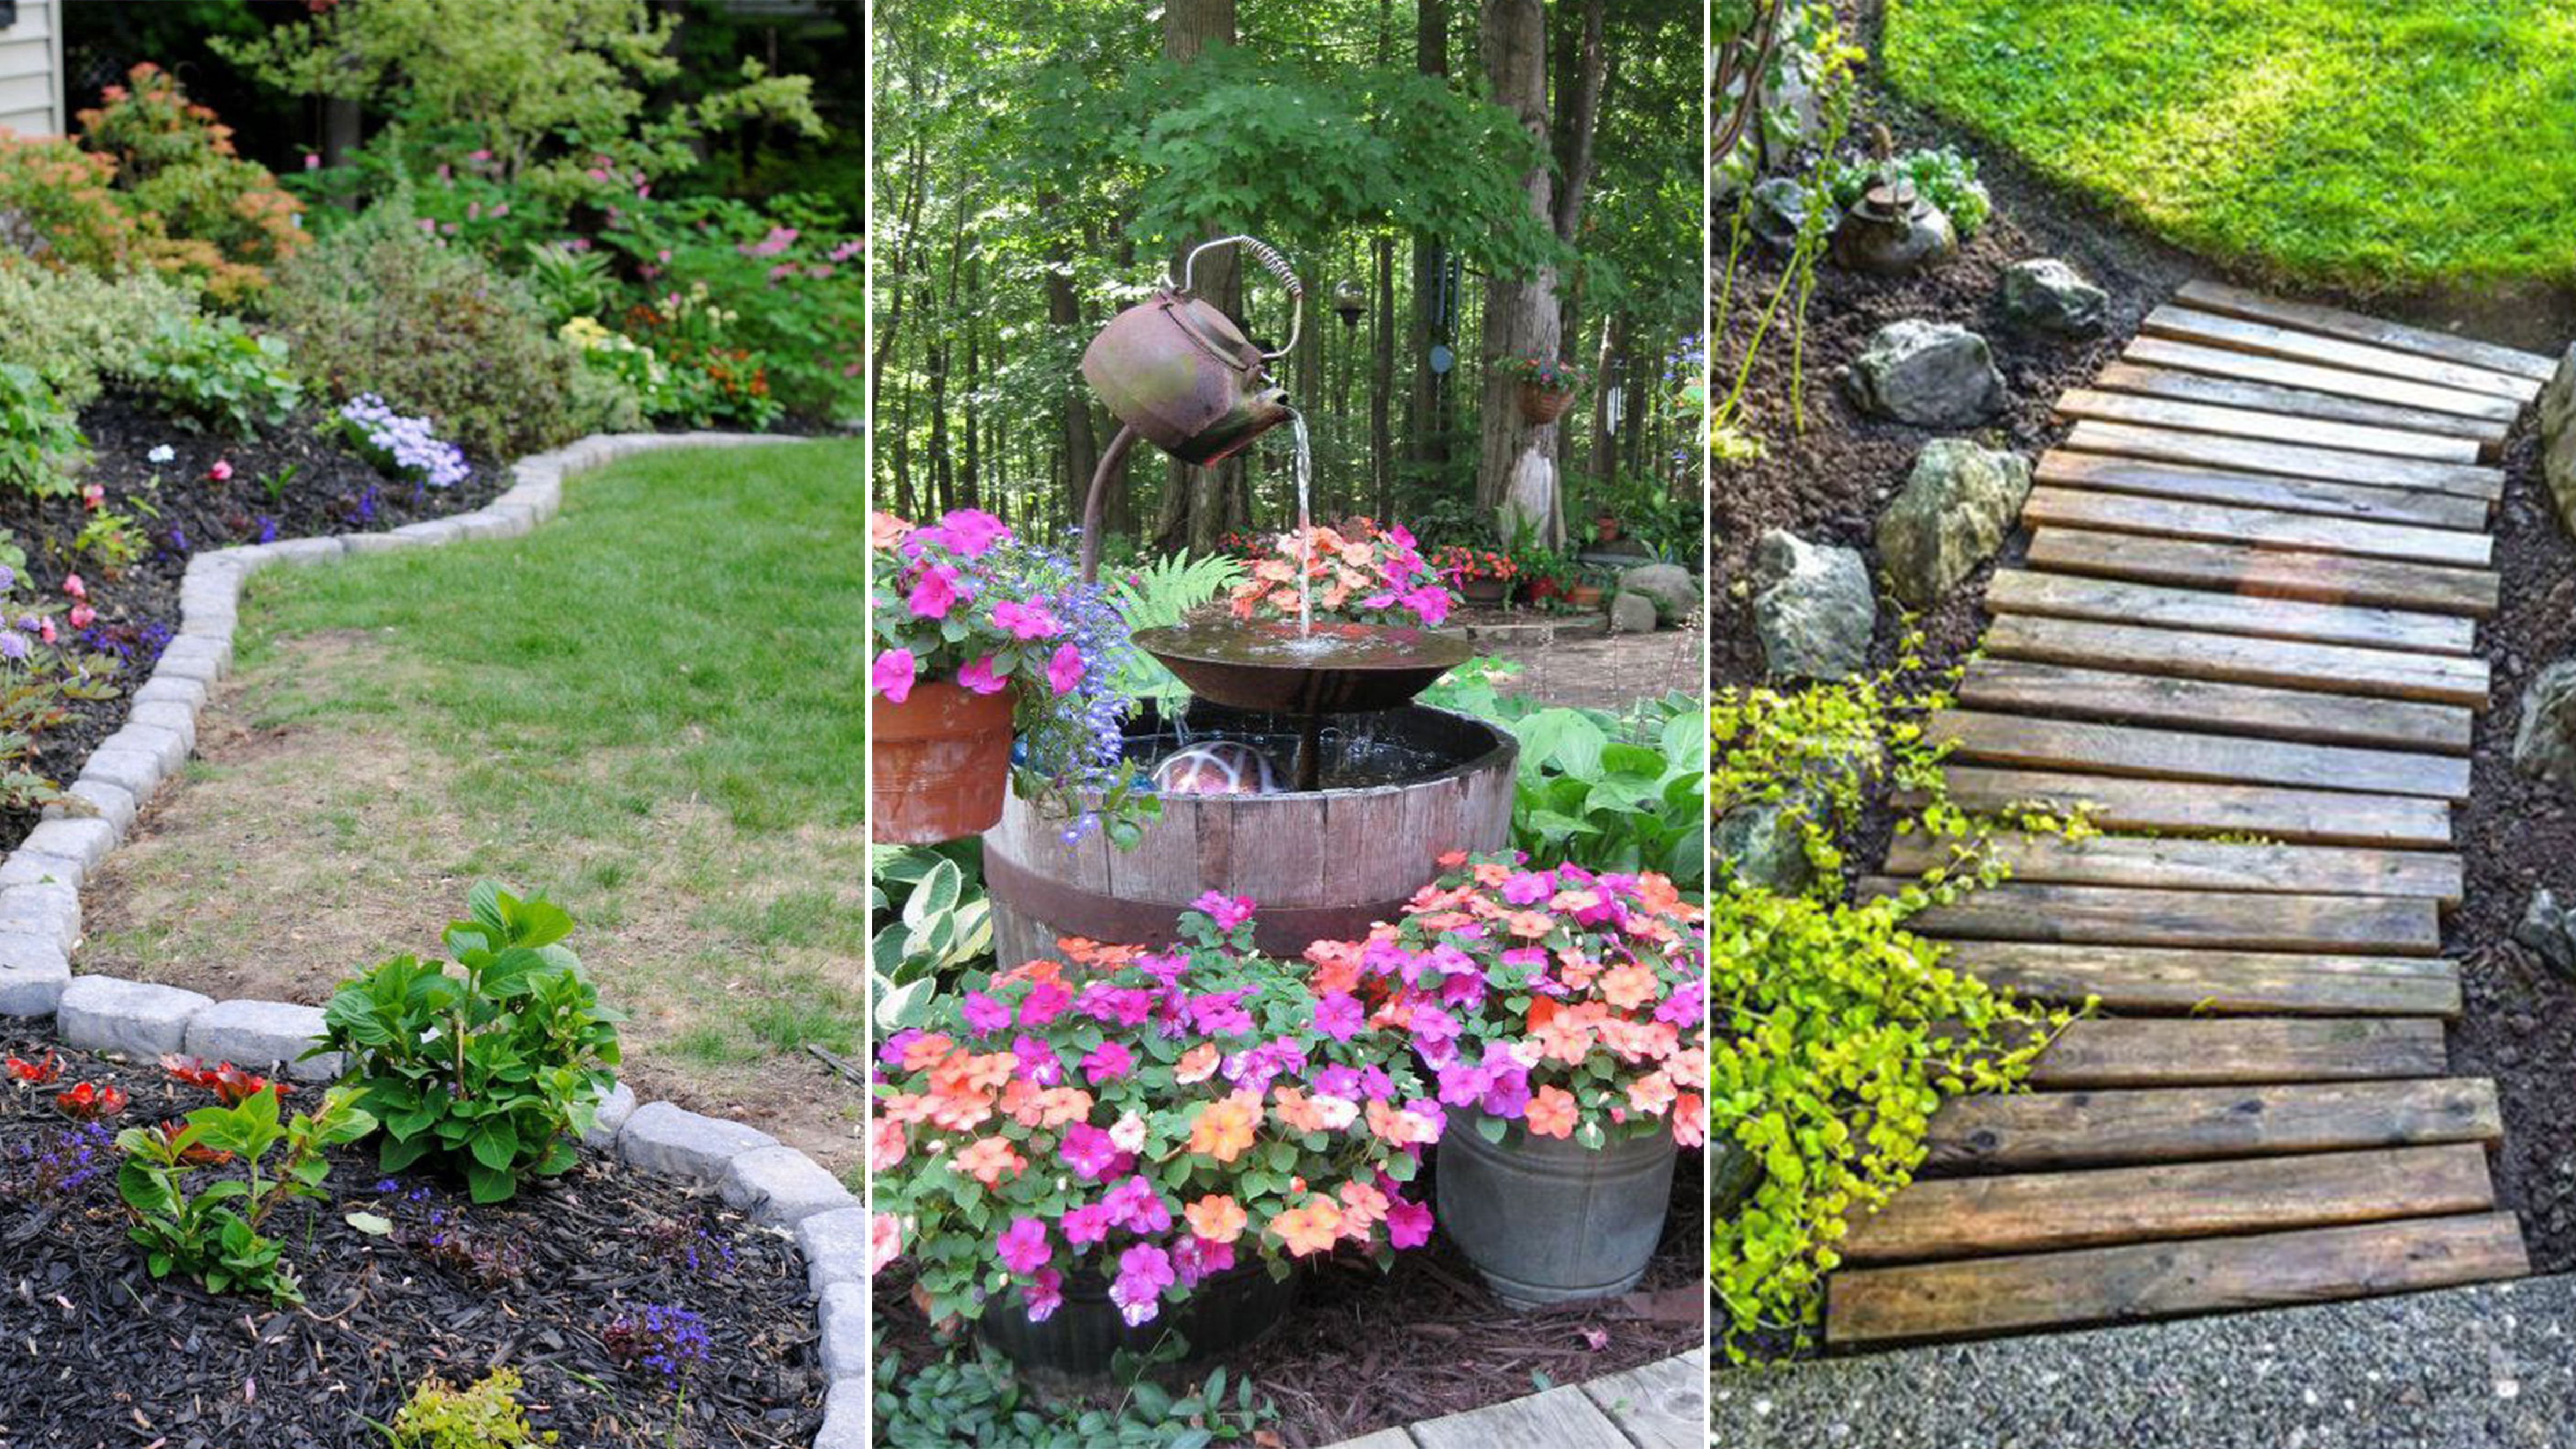 14 Cheap Landscaping Ideas - Budget-Friendly Landscape Tips for